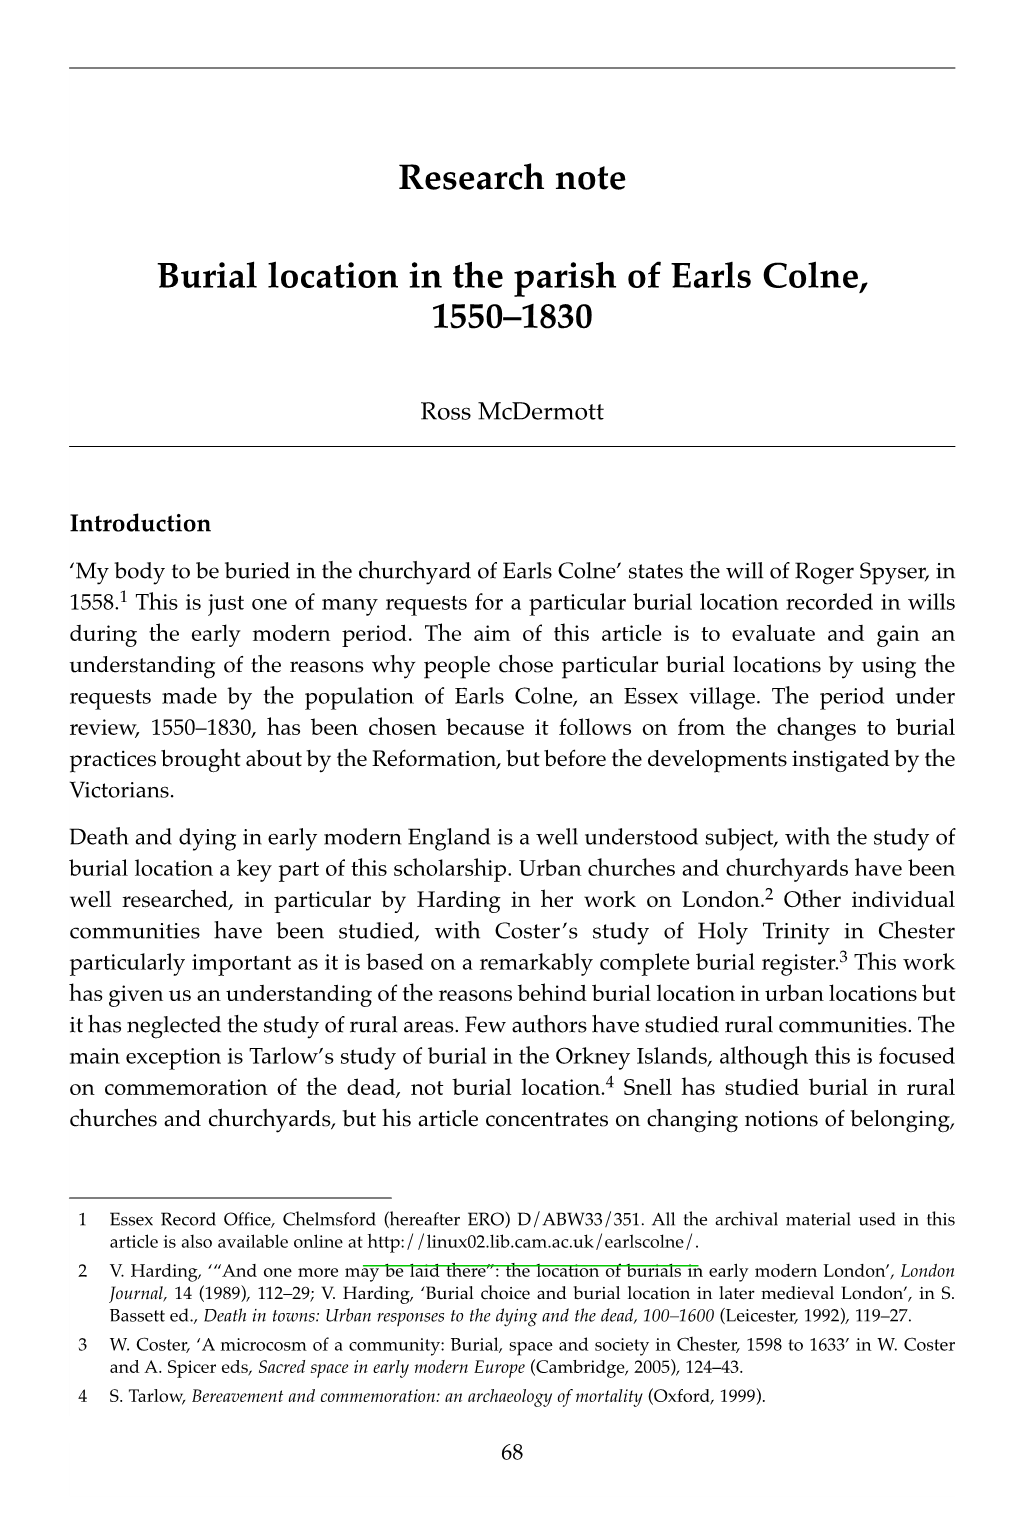 Burial Location in the Parish of Earls Colne, 1550ÂŒ1830